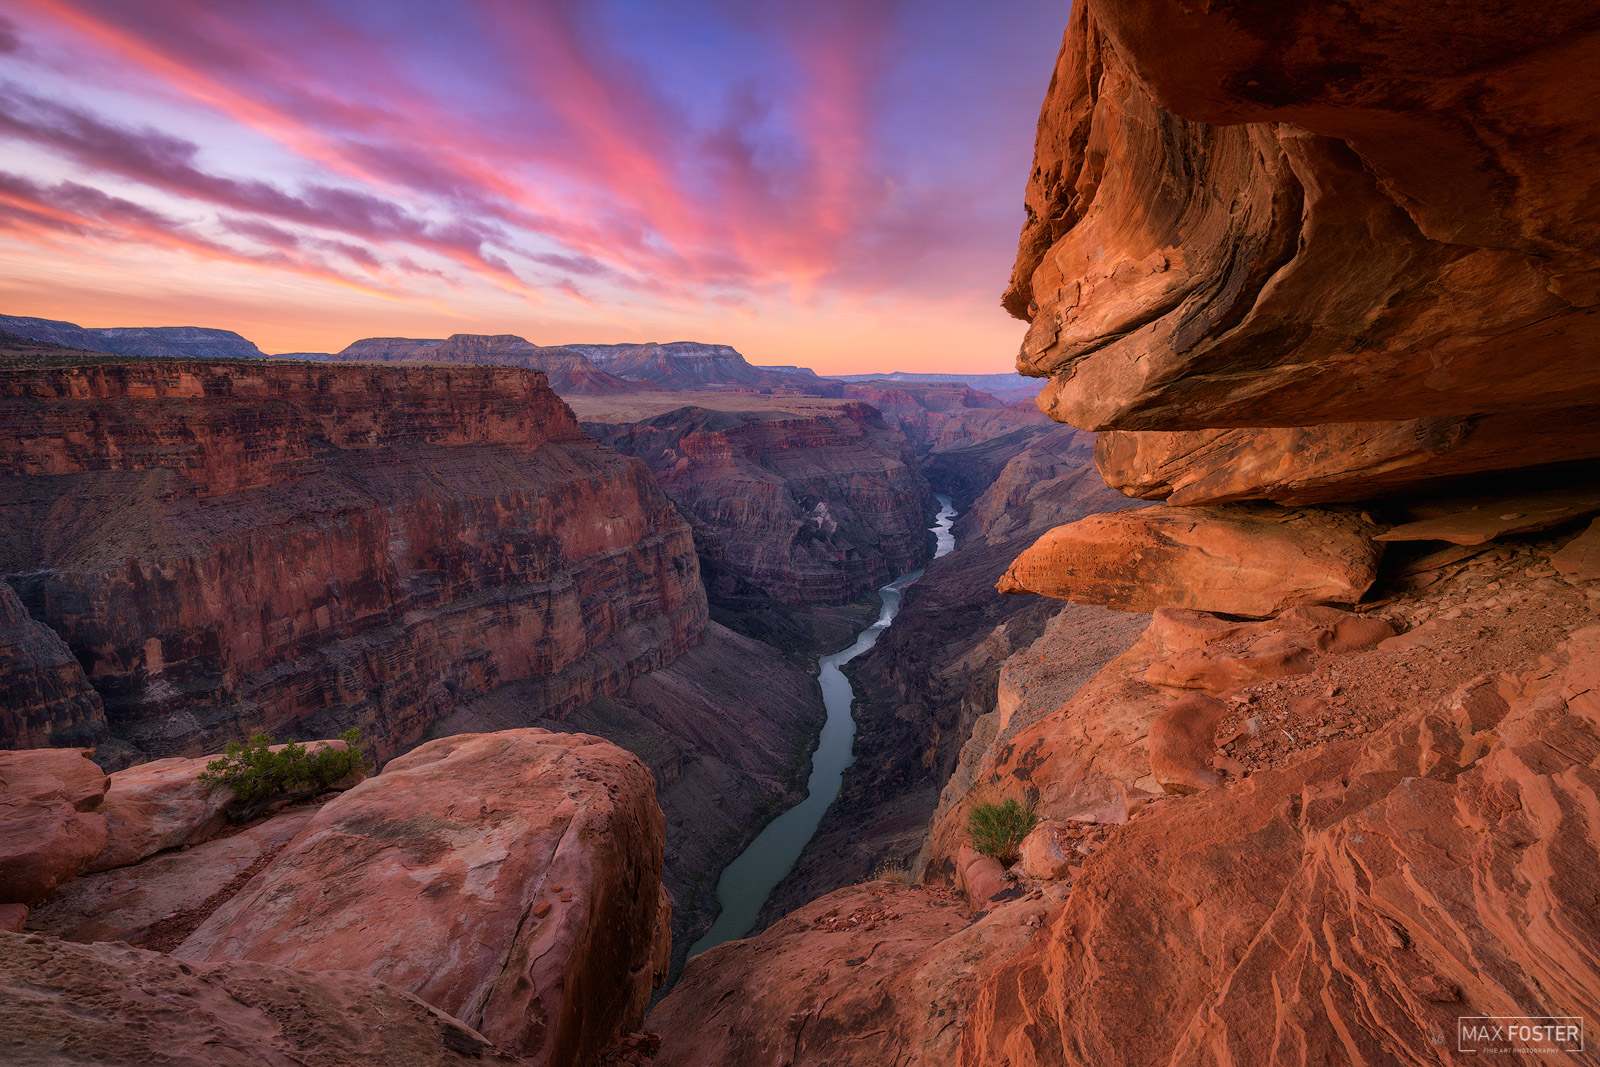 Bring your walls to life with Rim to Rim, Max Foster's limited edition photography print of Toroweap from his Grand Canyon gallery...